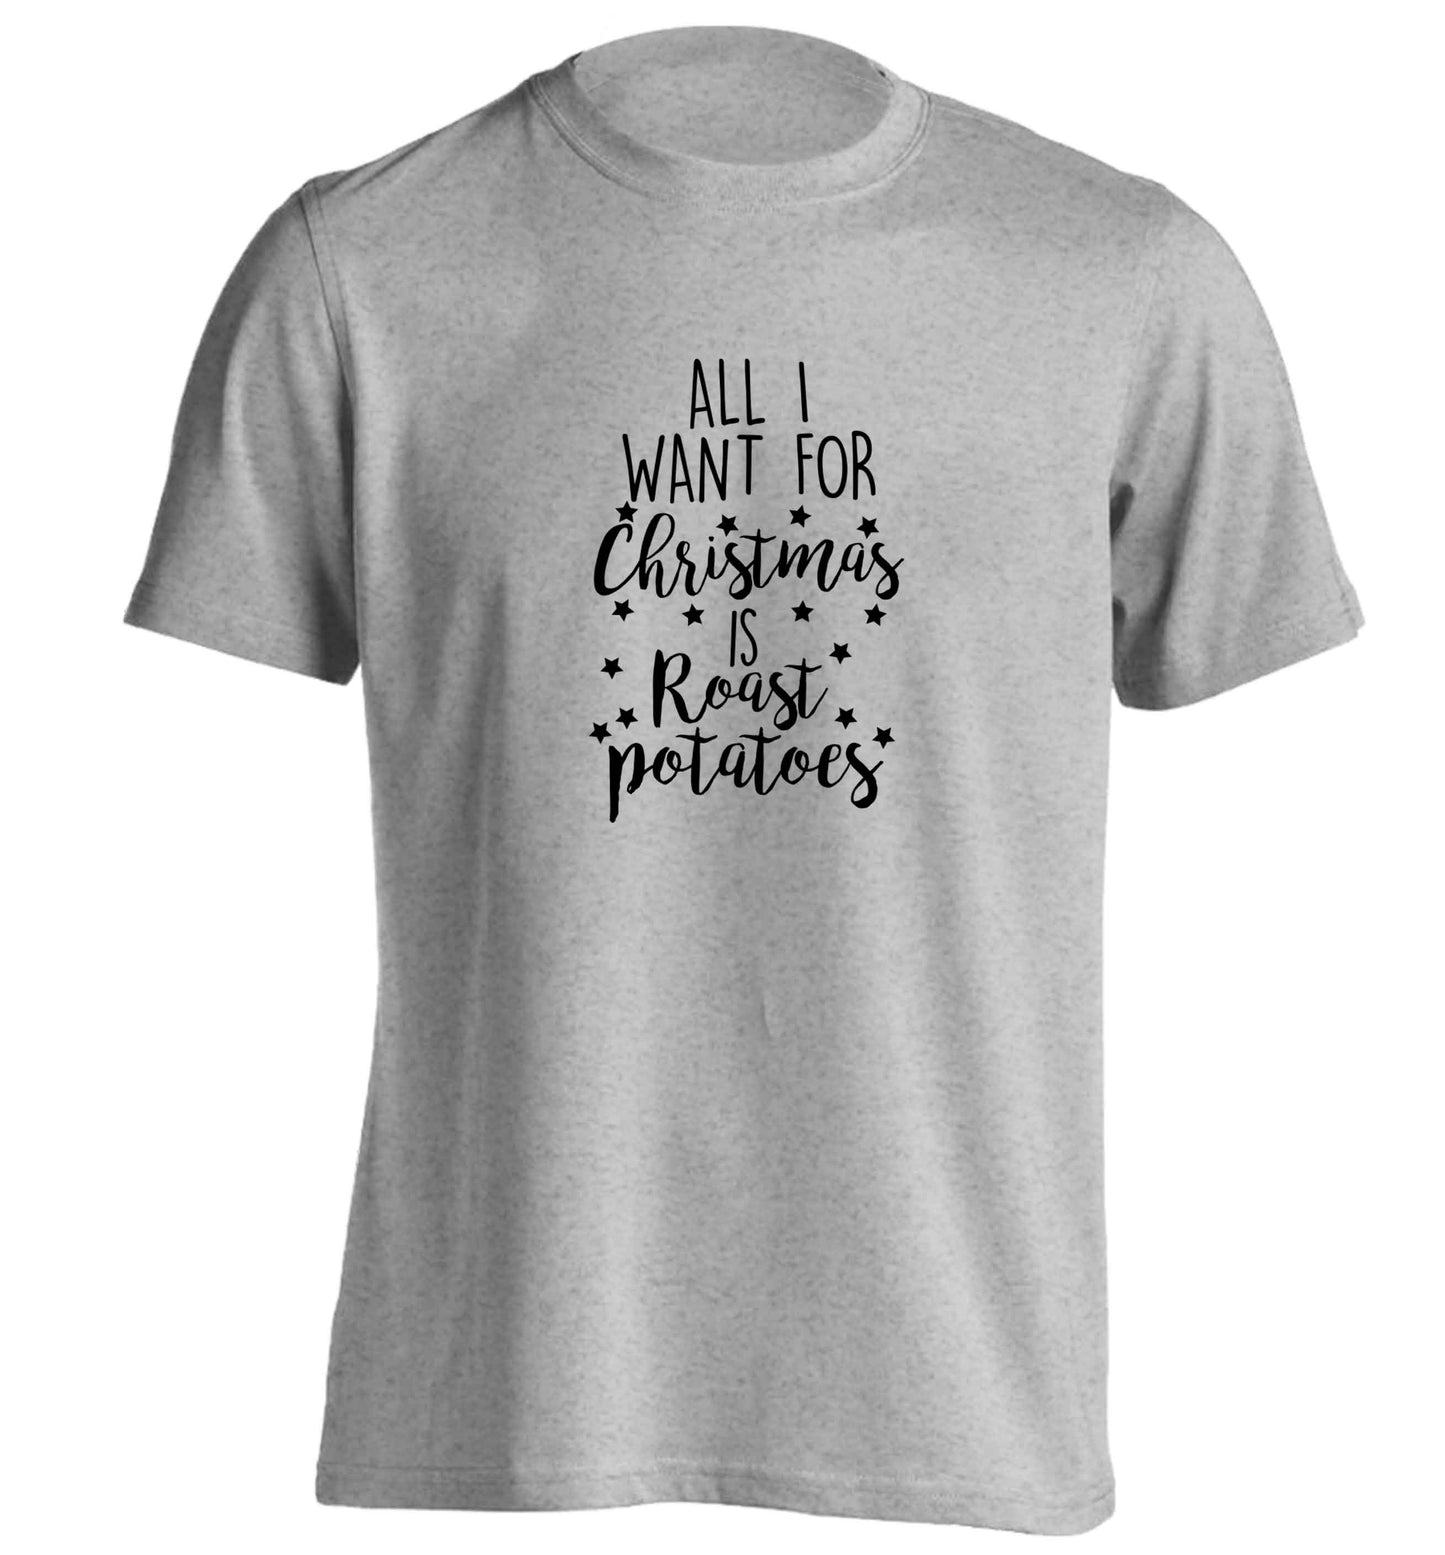 All I want for Christmas is roast potatoes adults unisex grey Tshirt 2XL